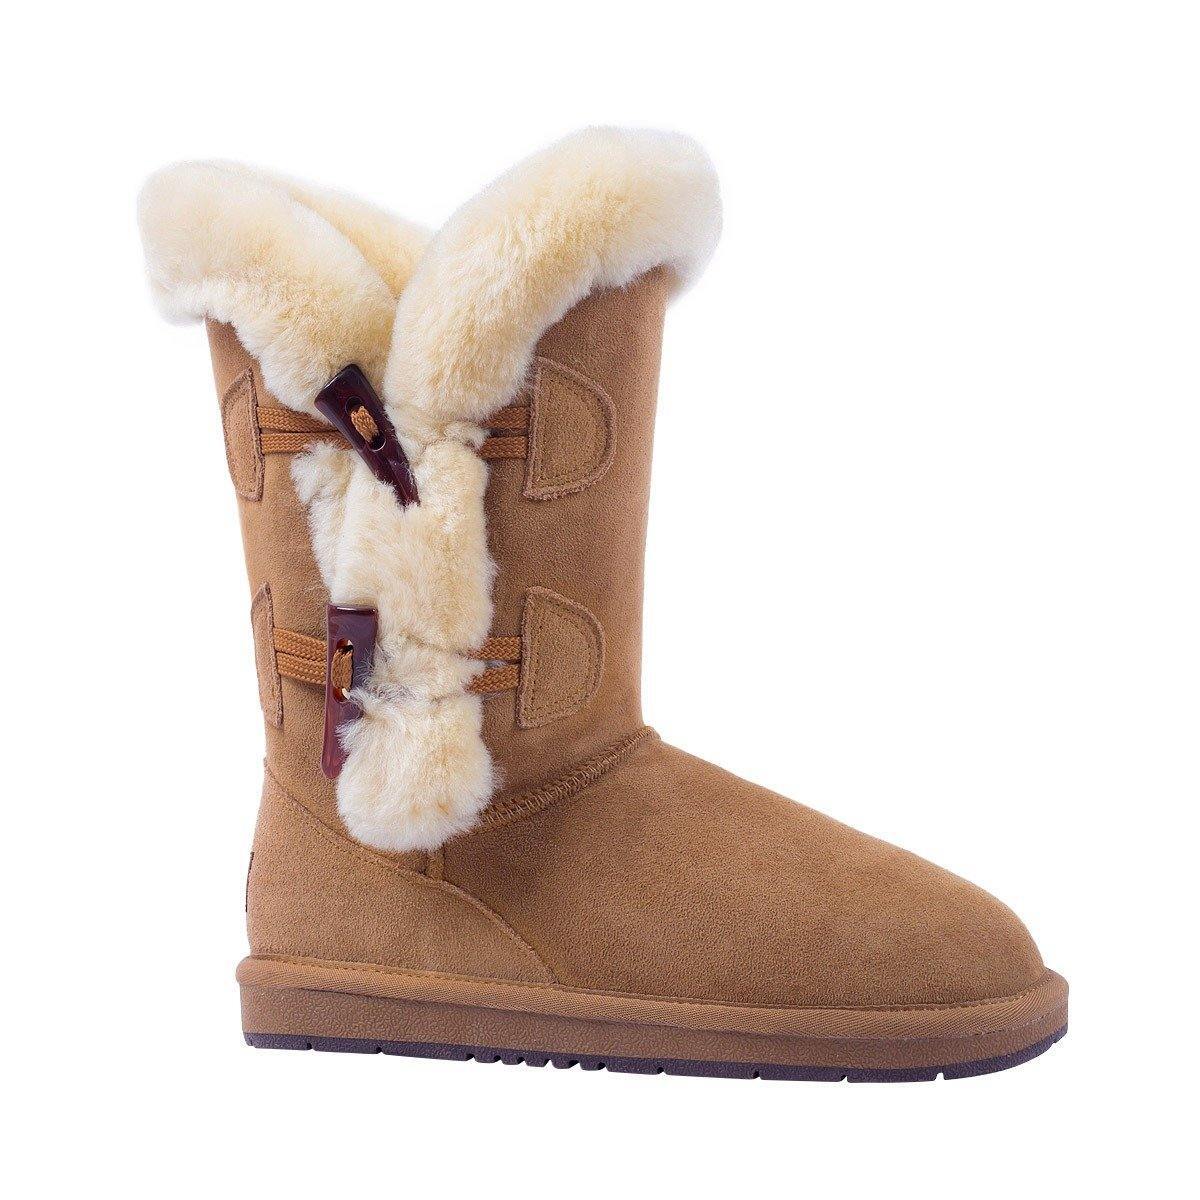 what material are uggs made of